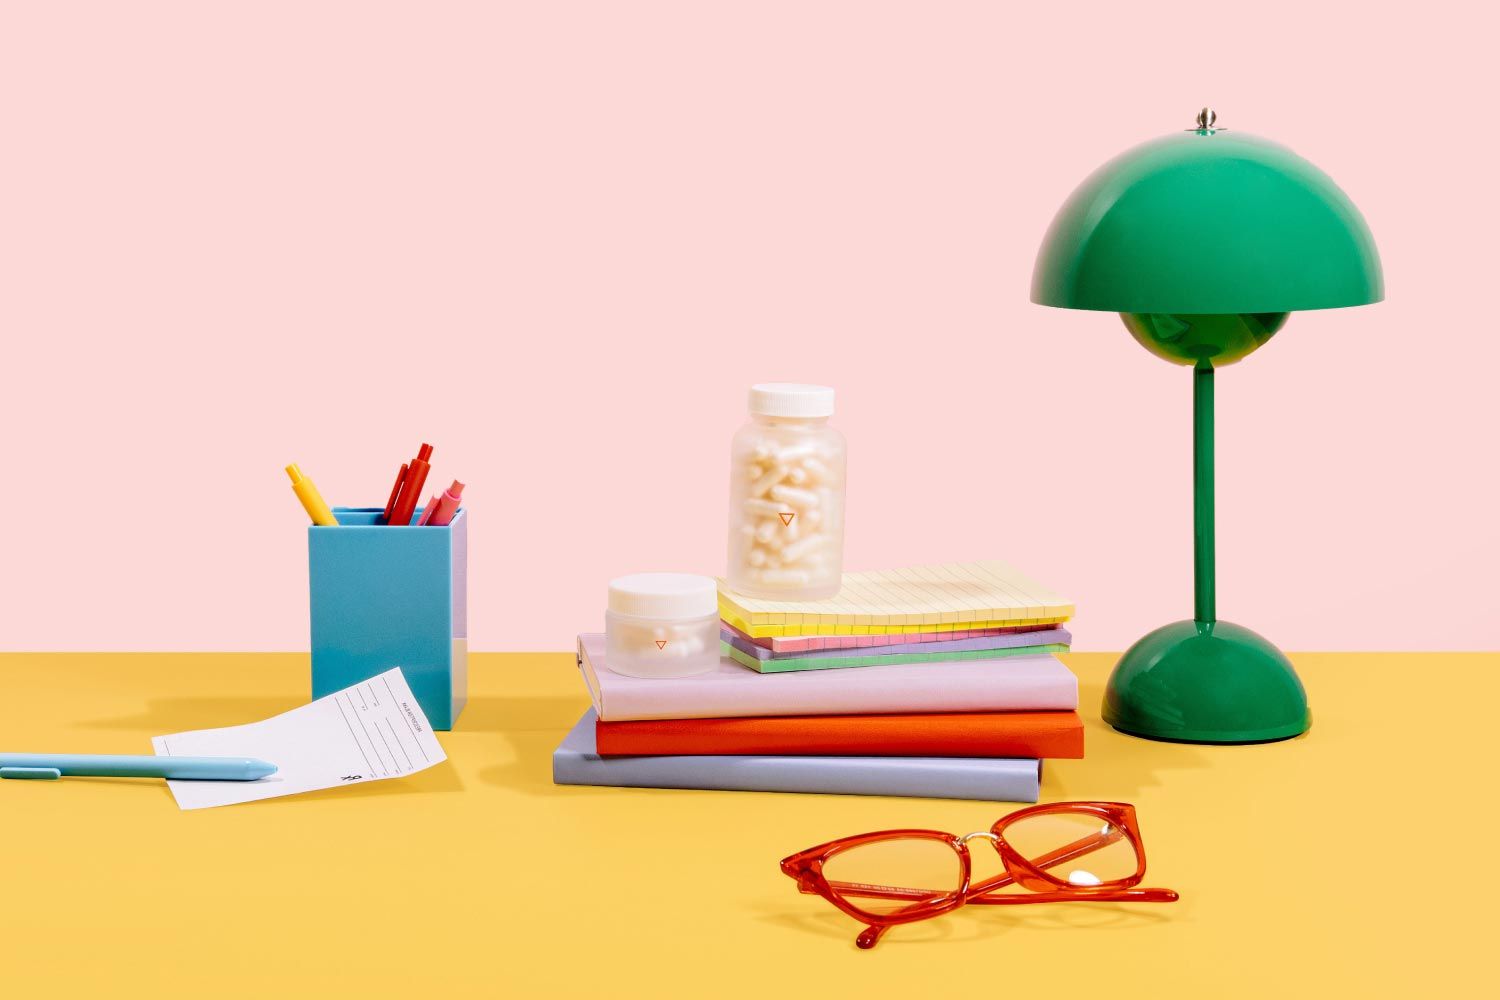 Wisp glass jars, a green lamp, pen holder, red glasses and an Rx script on a yellow and pink background